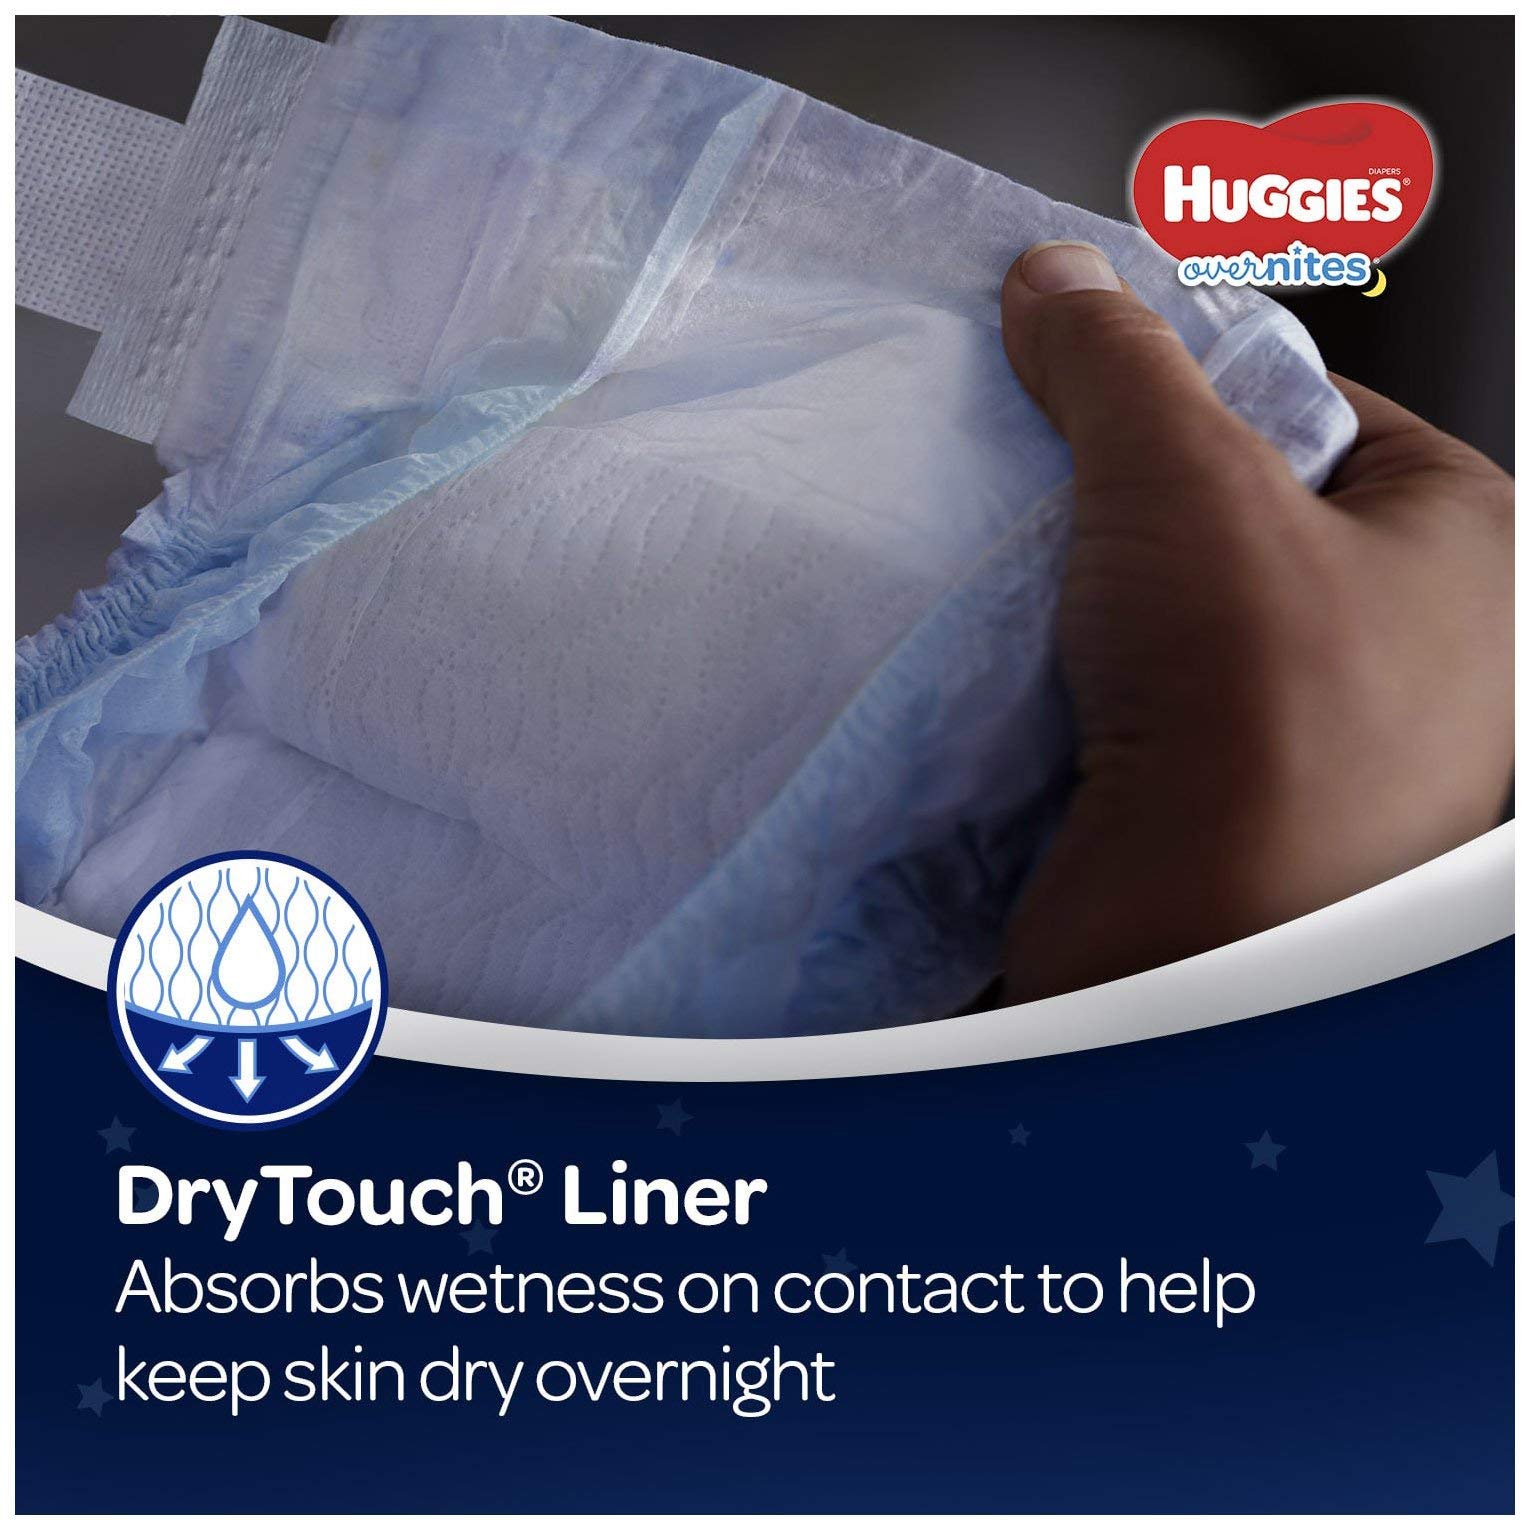 Huggies Overnites Nighttime Diapers, Size 5, 58 Ct